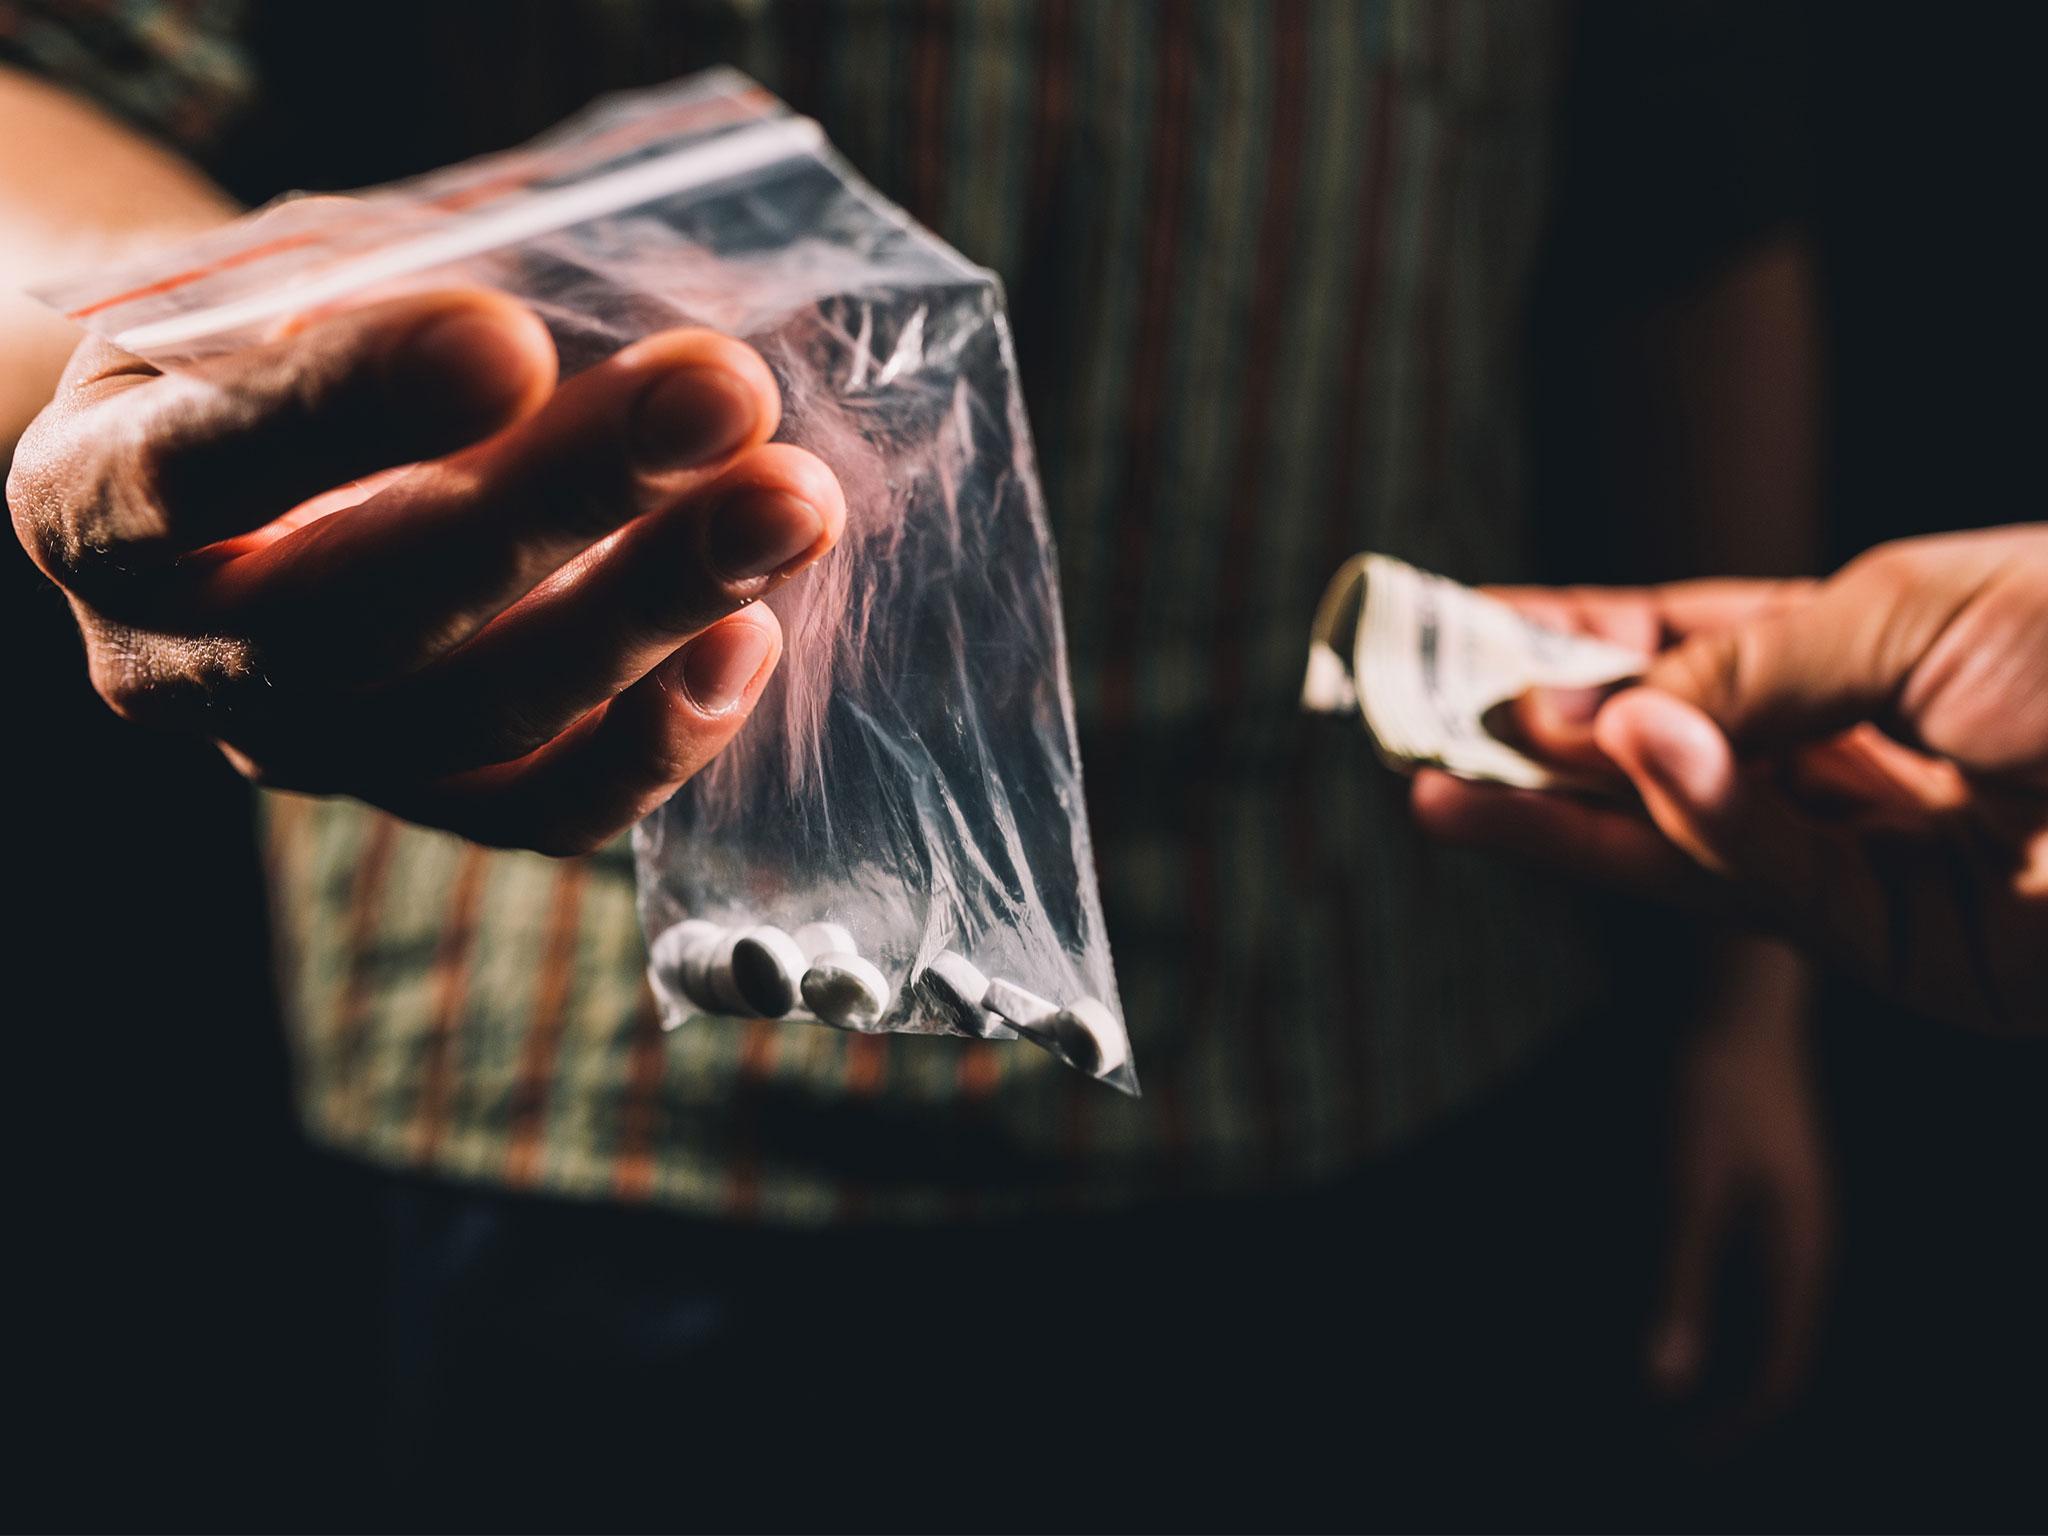 The survey found that drugs and gambling are seen as acceptable money-making activities by a sizeable number of students